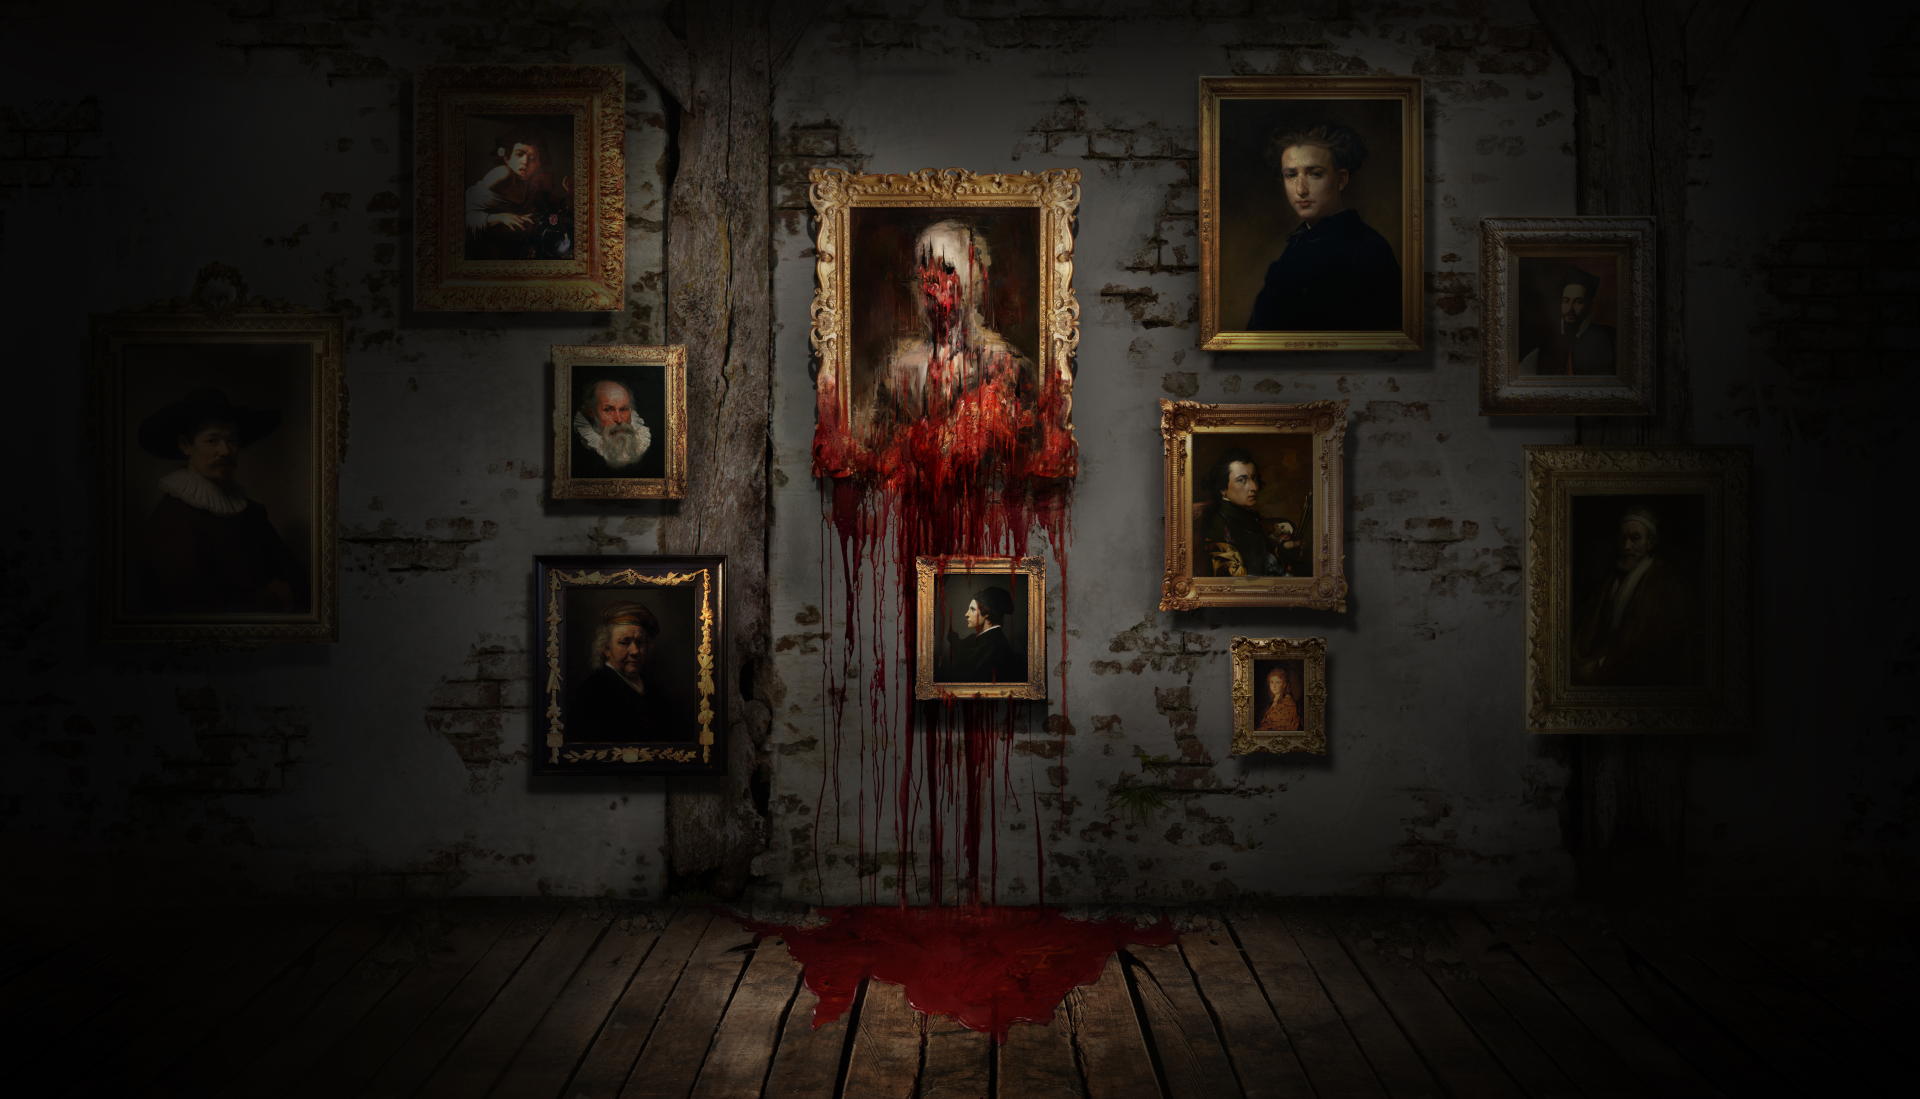 Layers of Fear Free Game Download